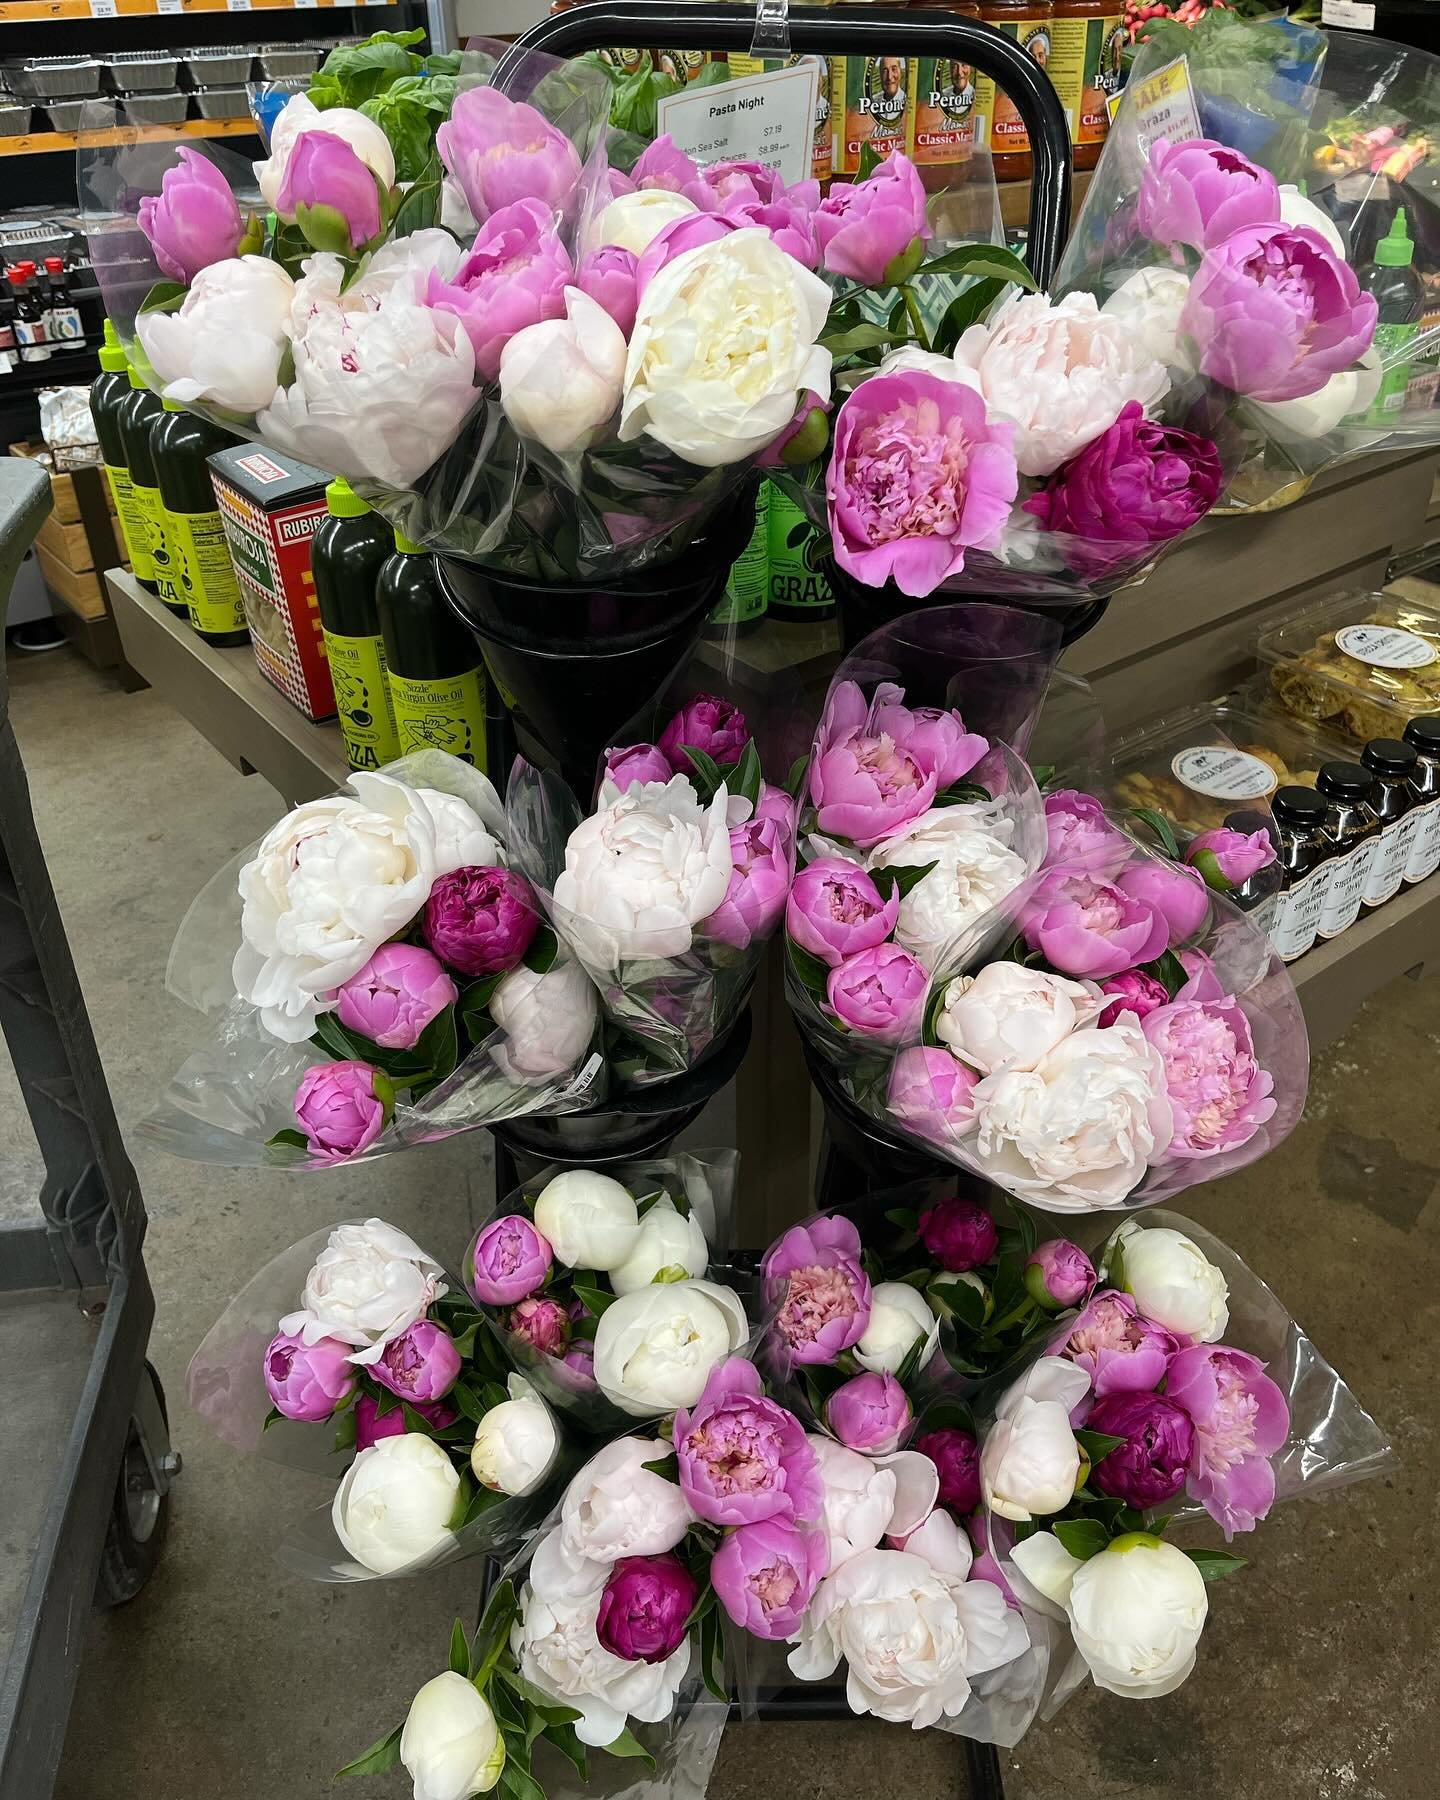 Peonies! Lots of pretty peonies arrived at the Swamp today from @tryonmountainfarms ! Come and brighten your weekends!